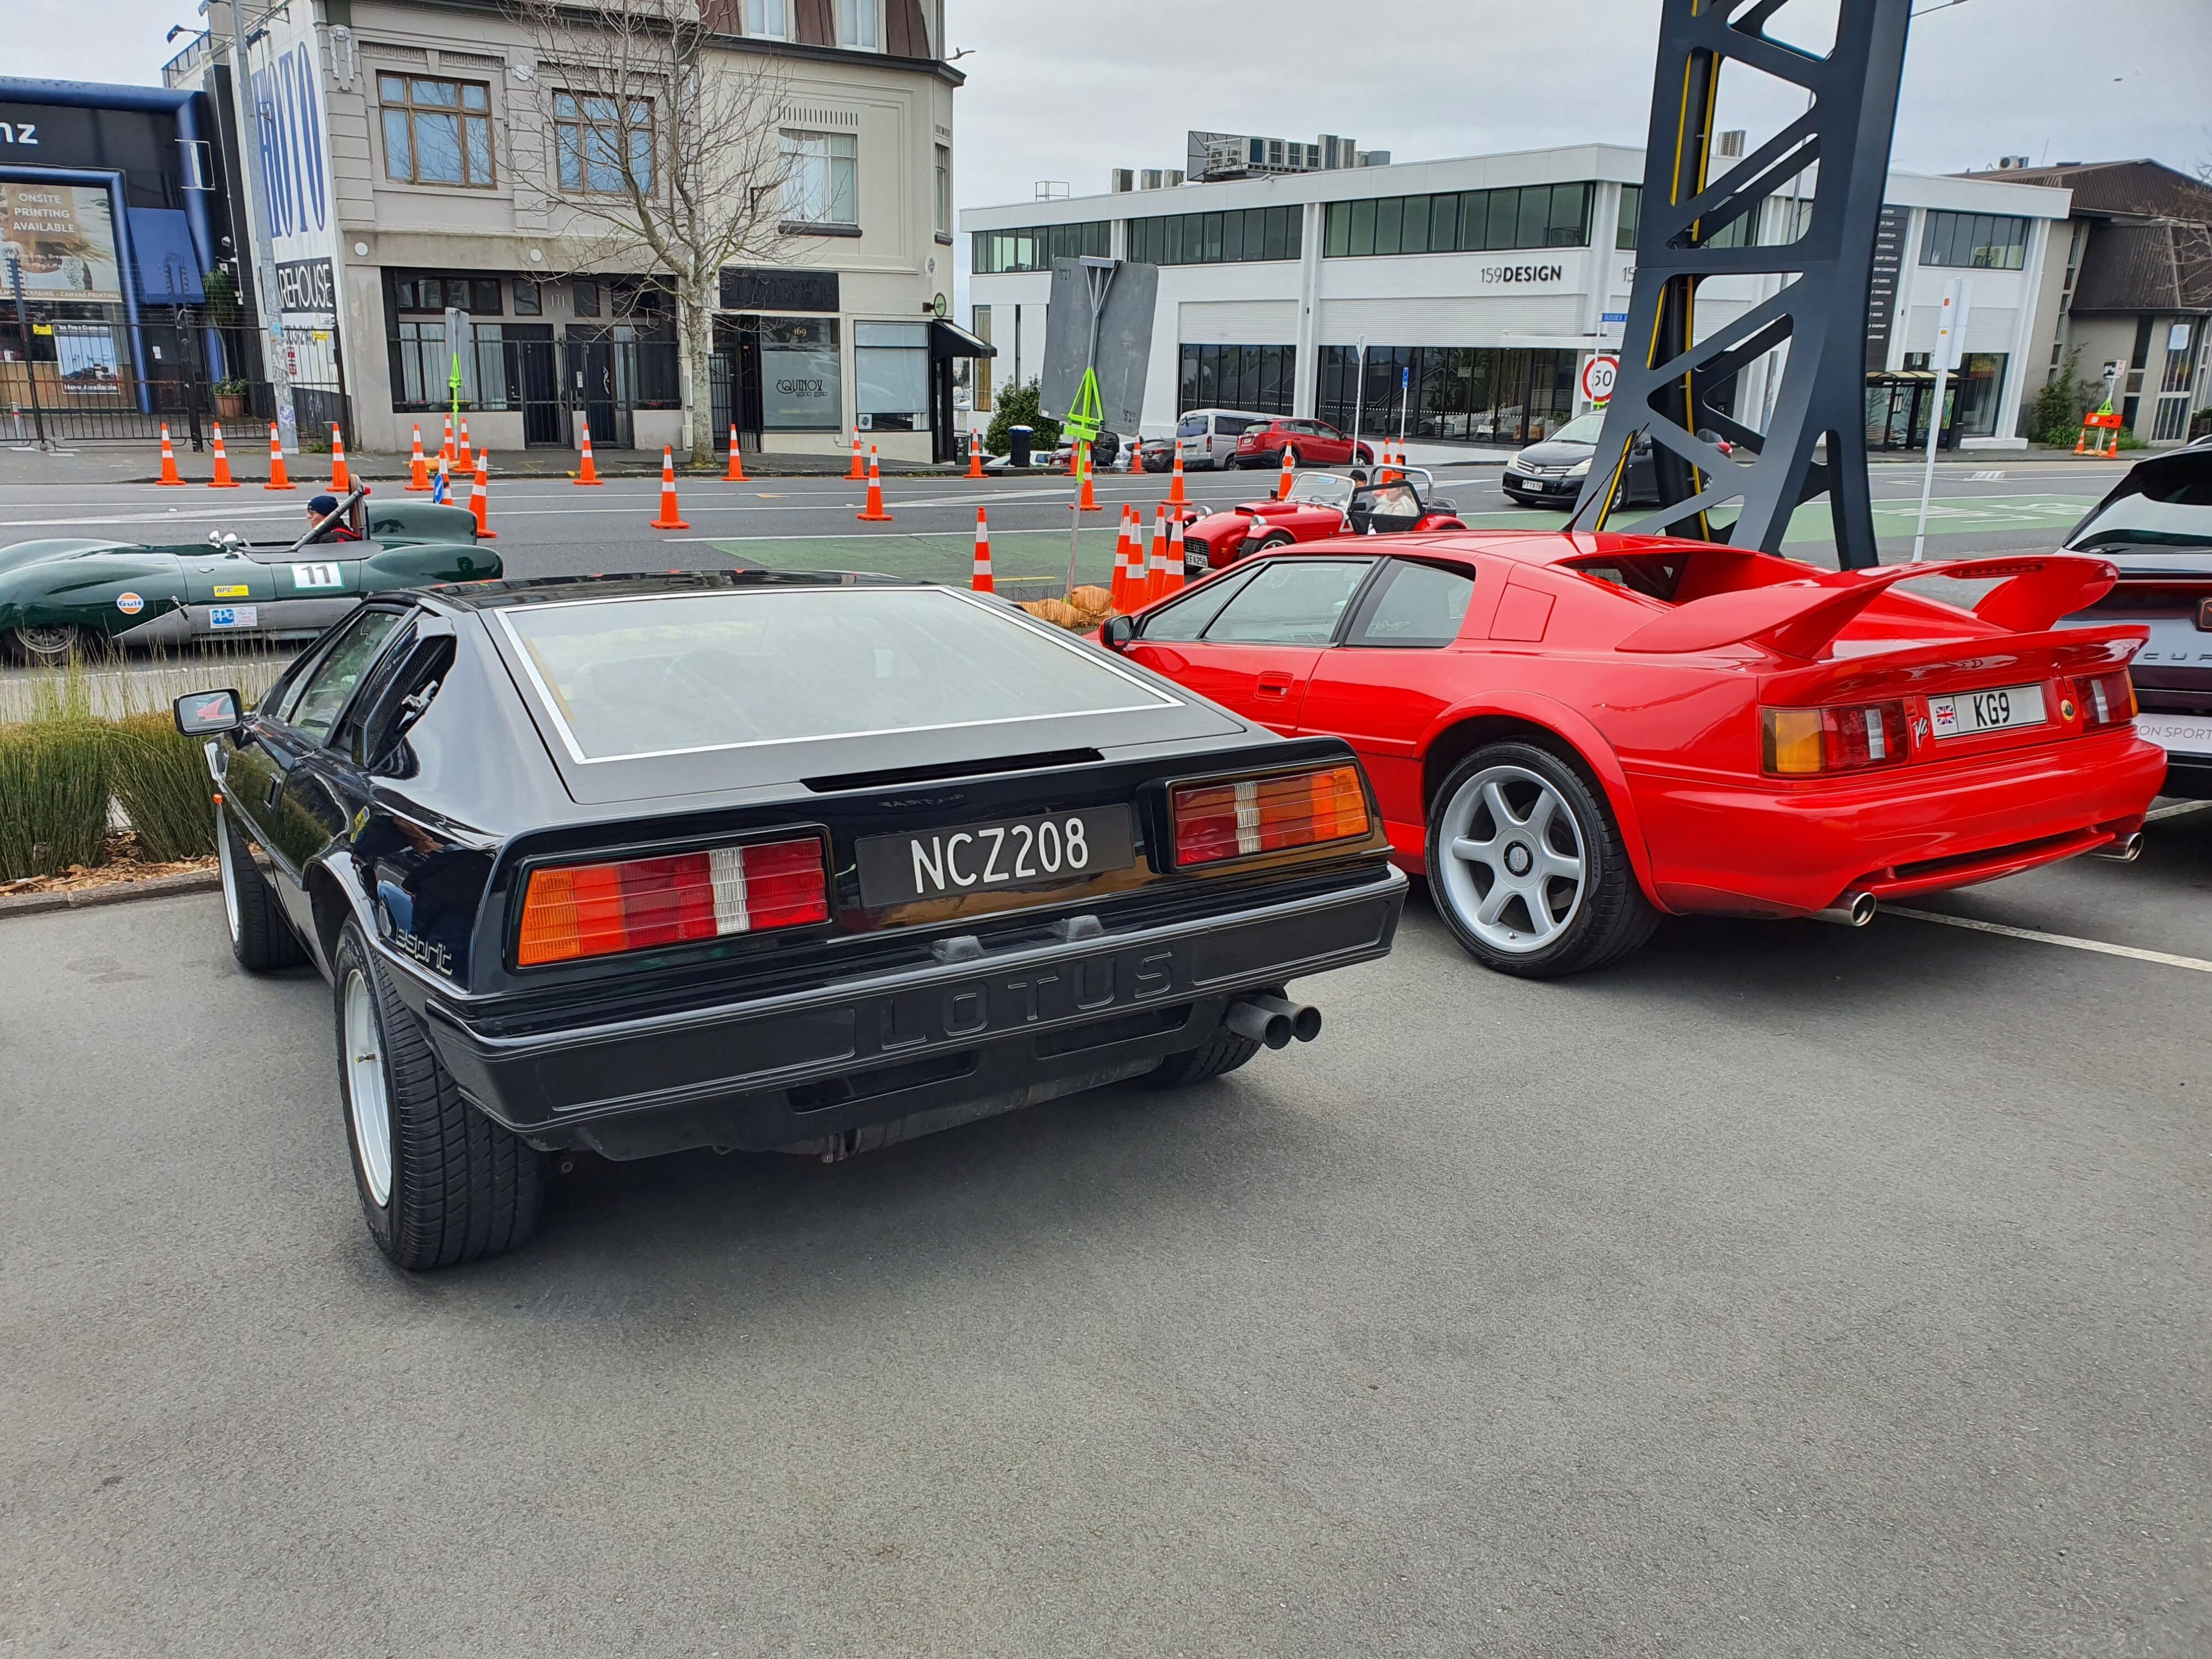 Two Lotus Esprits, a black Esprit Turbo on the left and a red Esprit V8 on the right.